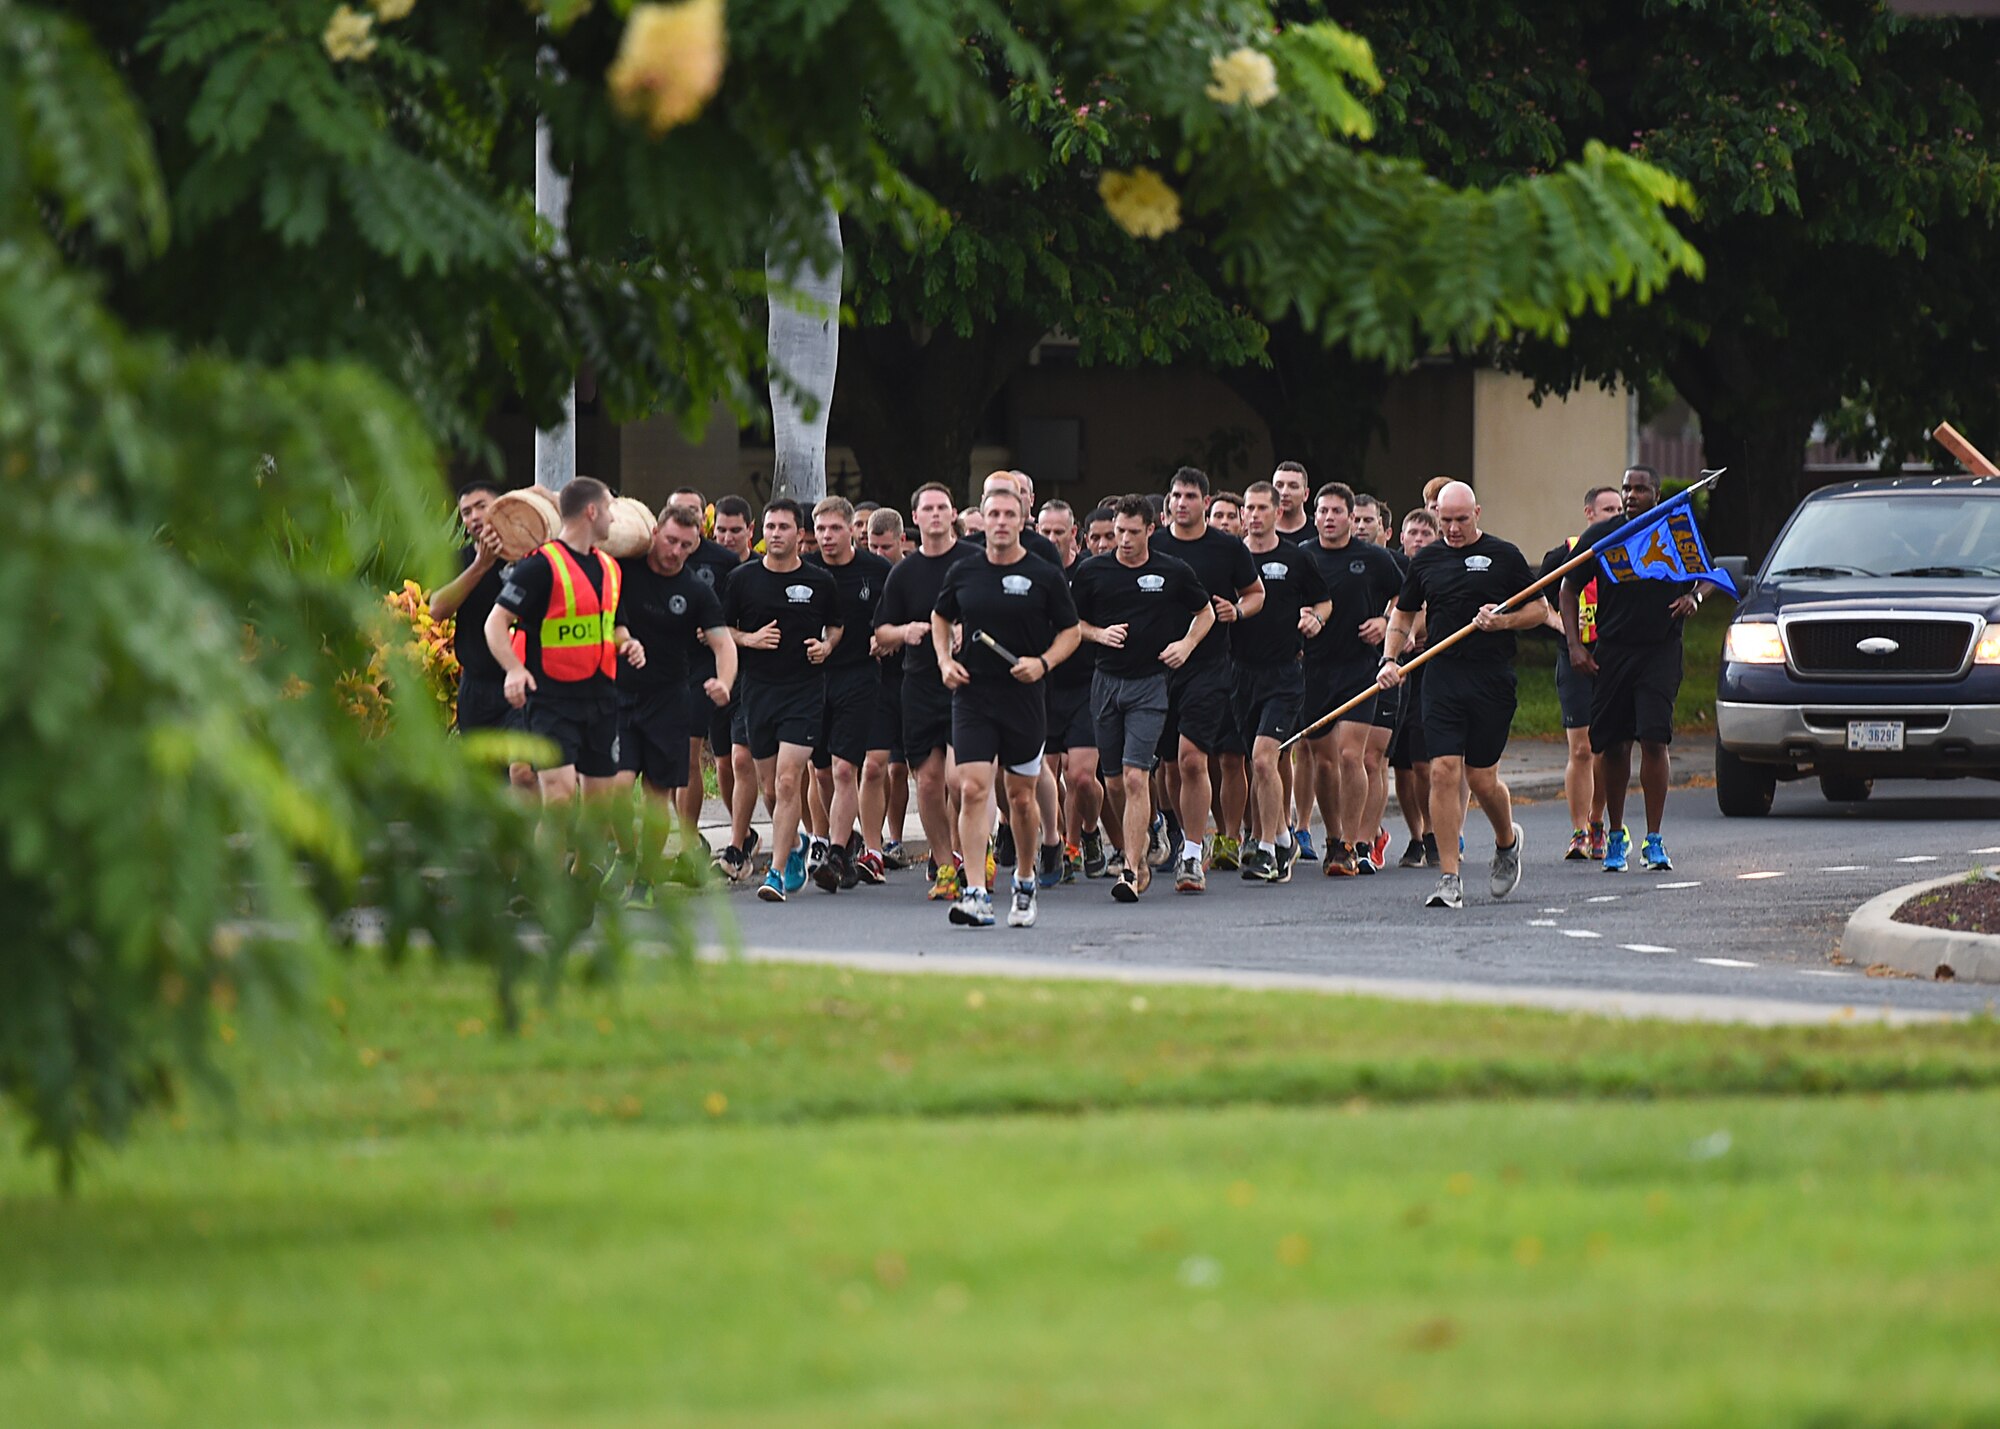 Airmen from the 25th Air Support Operations Squadron run in formation from Earhart track to Atterbury Circle at the conclusion of the 24 hour Prisoner of War and Missing In Action remembrance run on Joint Base Pearl Harbor-Hickam, Hawaii, Sept. 18, 2015. The 24-hour POW/MIA remembrance run was organized by the 25th Air Support Operations Squadron as a part of POW/MIA week and National POW/MIA Day. Every year the nation pauses on the third Friday of September to remember the sacrifices and service of prisoners of war. There are 83,344 Americans still unaccounted-for across the Defense Department. (U.S. Air Force photo by Tech. Sgt. Aaron Oelrich/Released)   